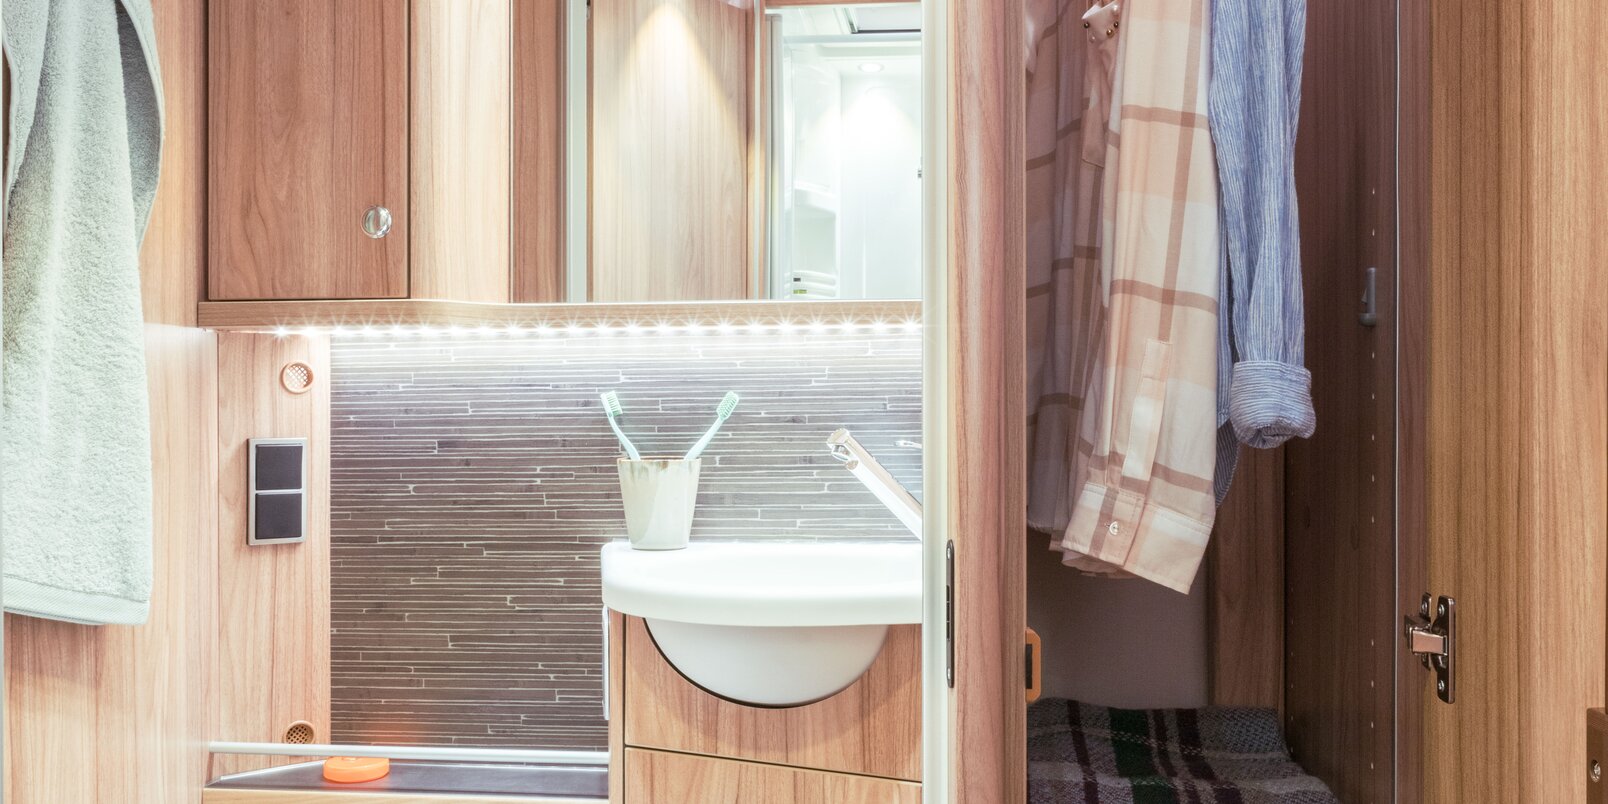 Bathroom in the HYMER Exsis-t: toilet, washbasin, mirror, storage cupboards, skylight and next to it a tall, full wardrobe